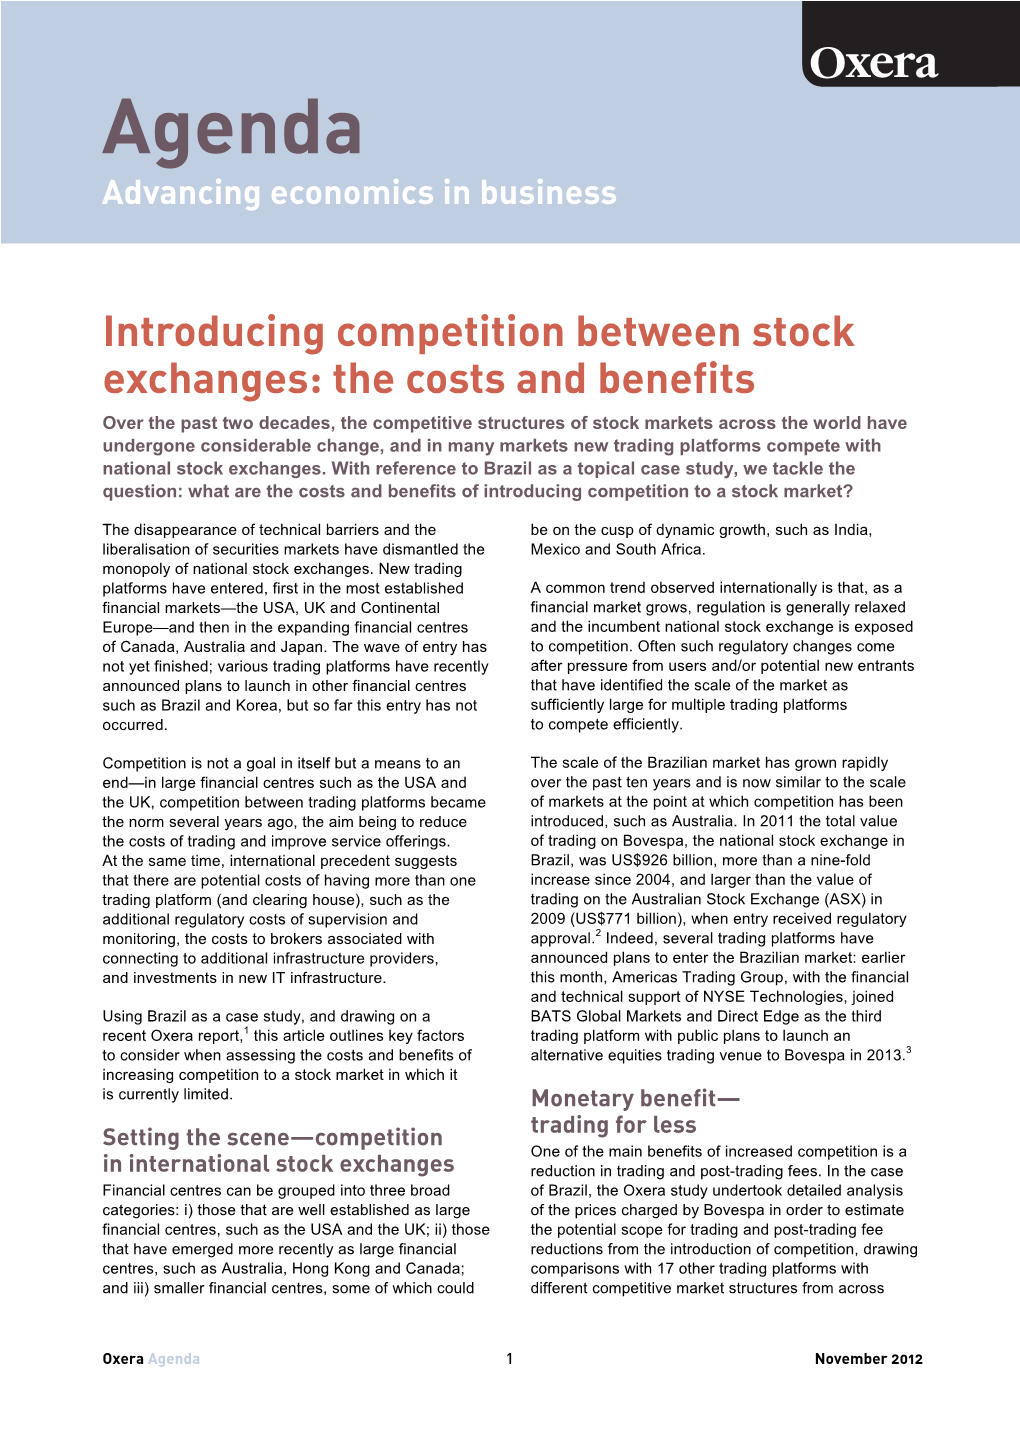 Introducing Competition Betweem Stock Exchanges